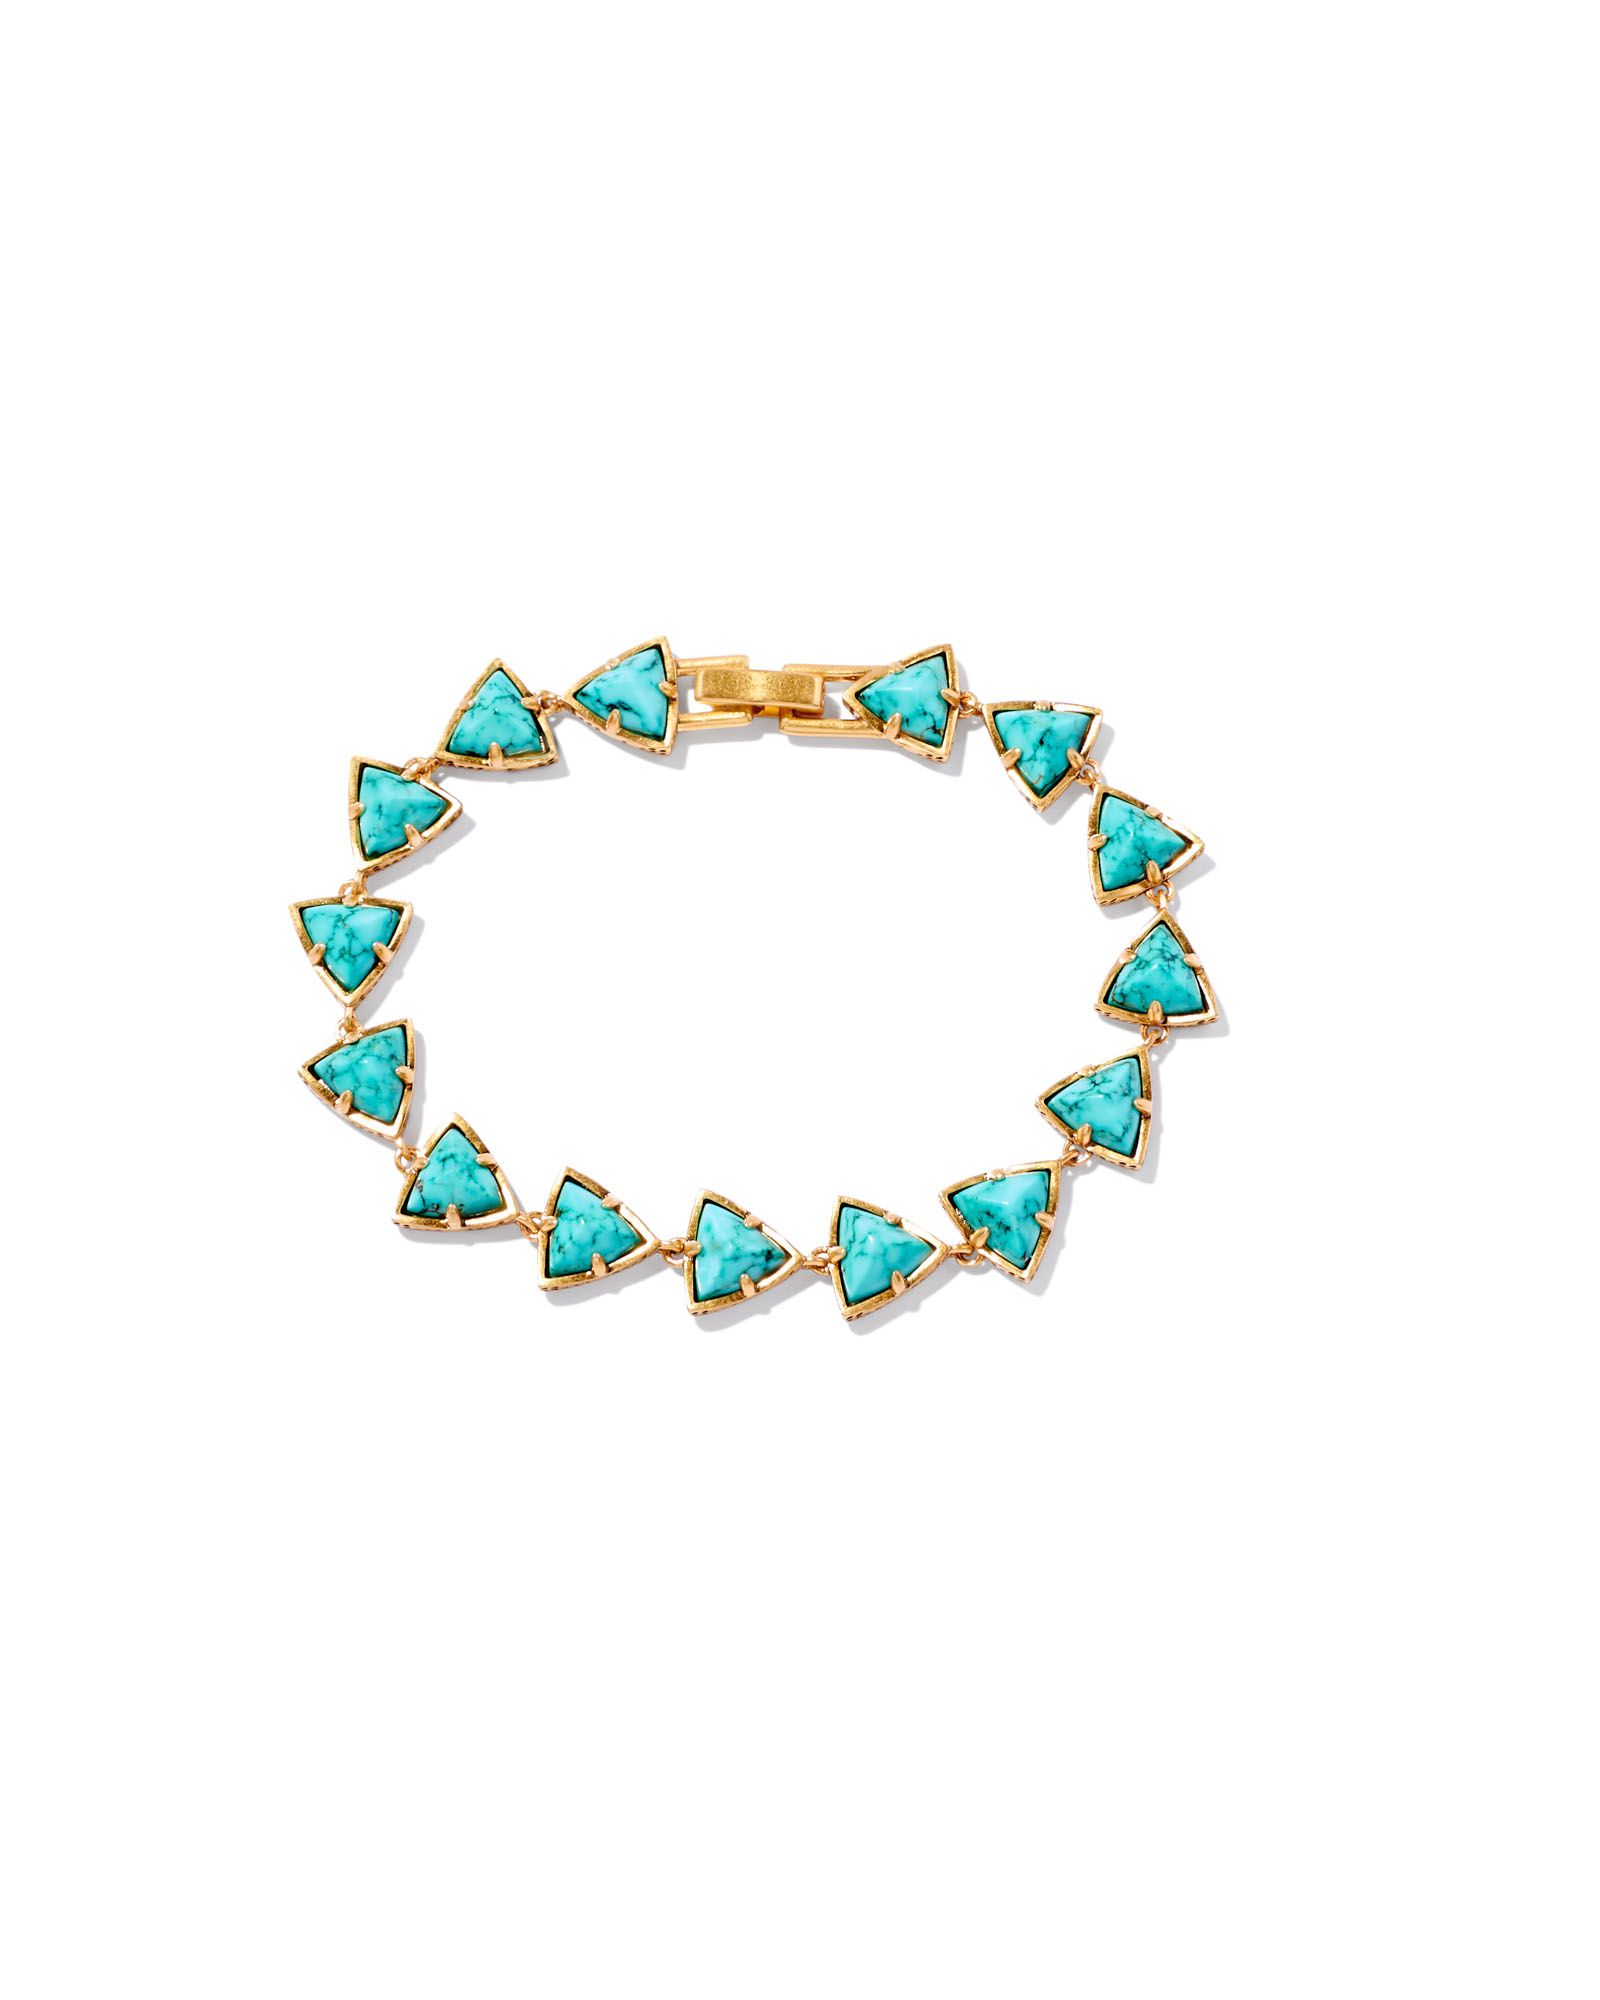 Robby Vintage Gold Link and Chain Bracelet in Variegated Turquoise Magnesite | Kendra Scott | Kendra Scott